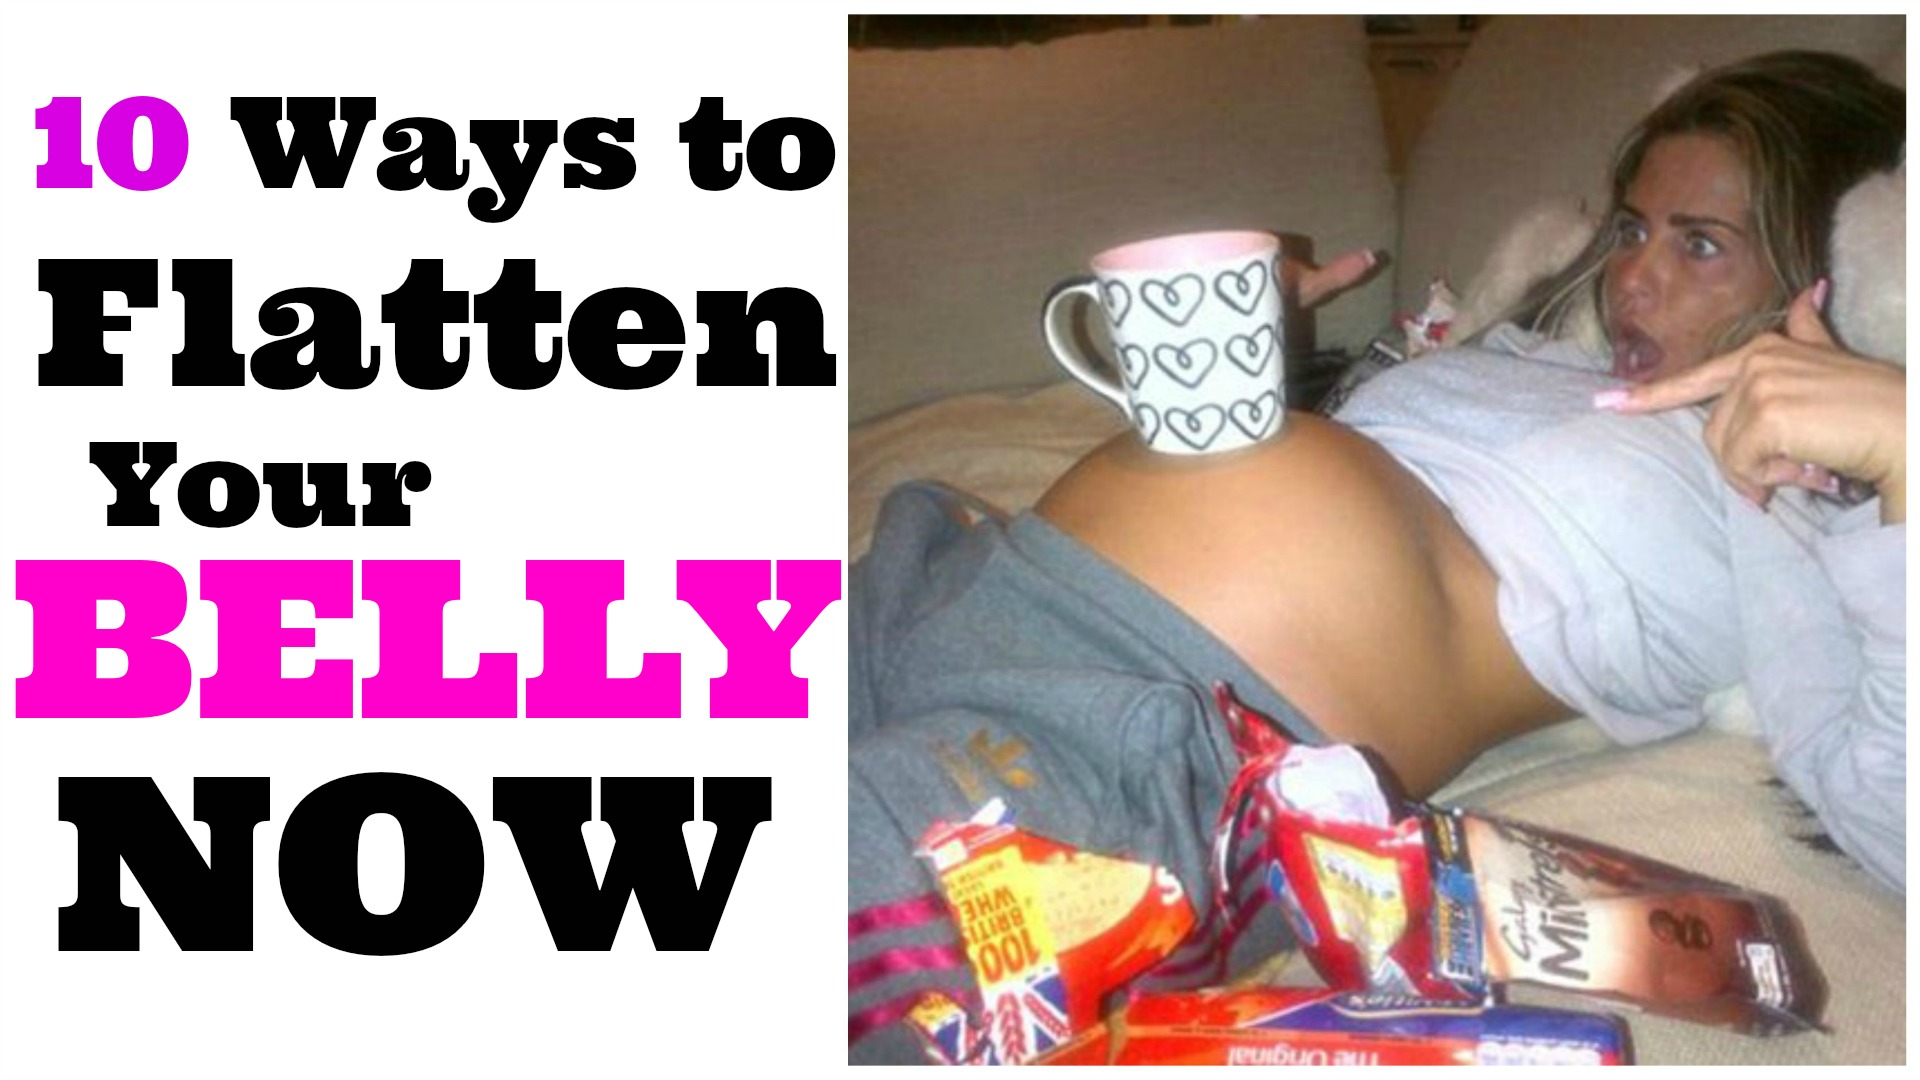 10 surprising WAYS TO GET RID OF YOUR BELLY BLOAT!  Is your POT BELLY out of control?